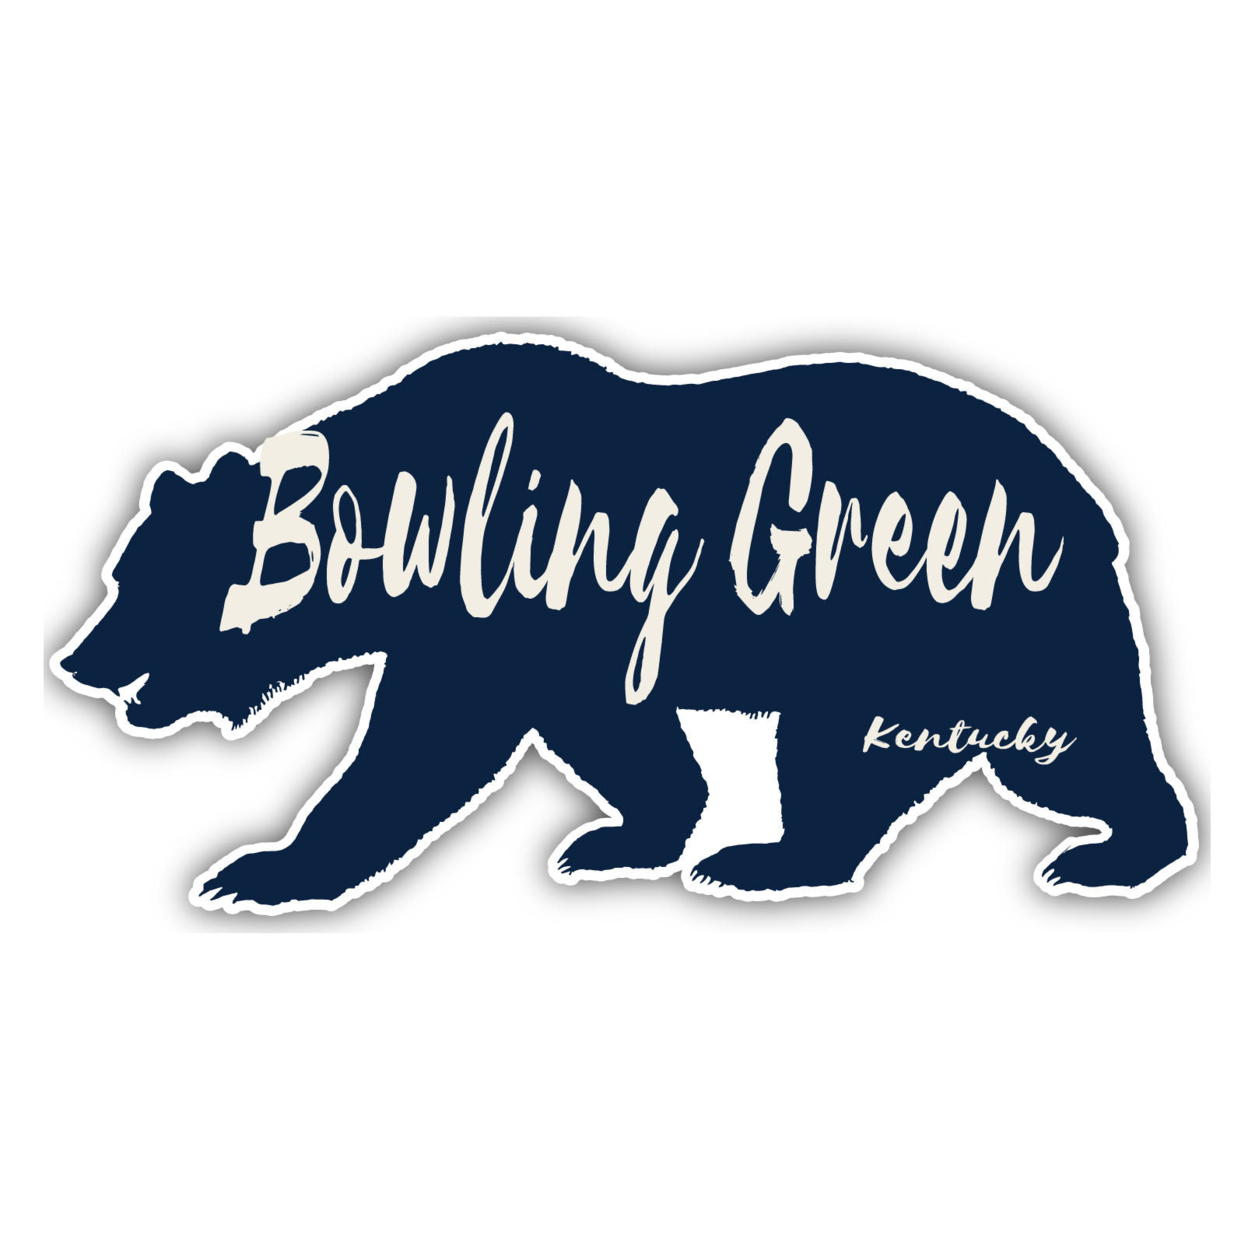 Bowling Green Kentucky Souvenir Decorative Stickers (Choose Theme And Size) - 4-Pack, 4-Inch, Tent